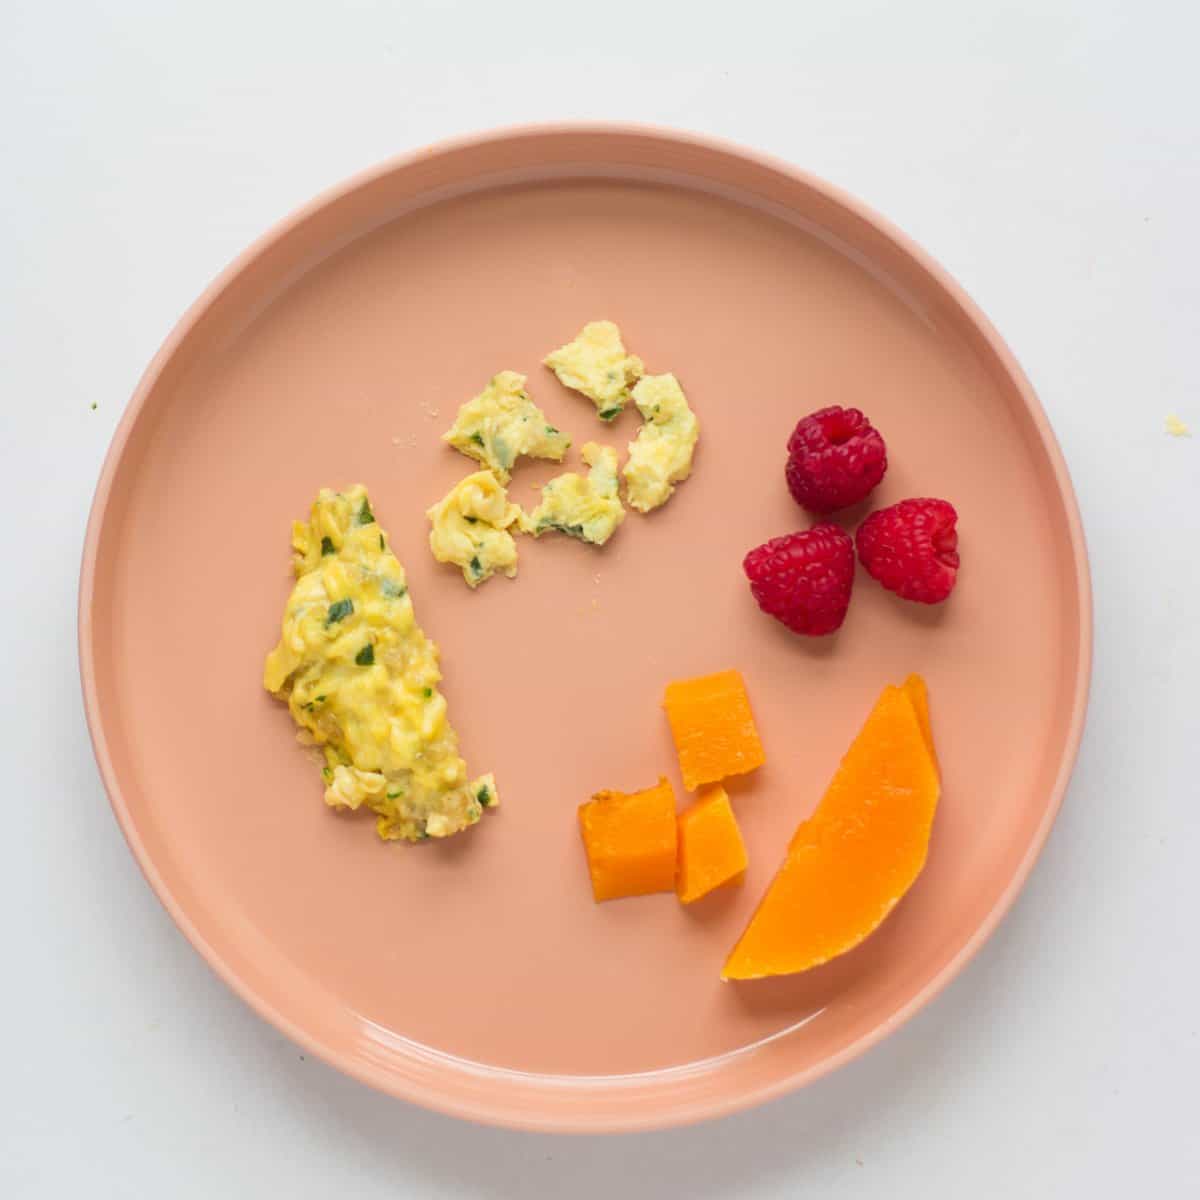 a baby's plate with eggs served two ways as a strip and bite sized pieces, butternut squash served two ways, and raspberries.